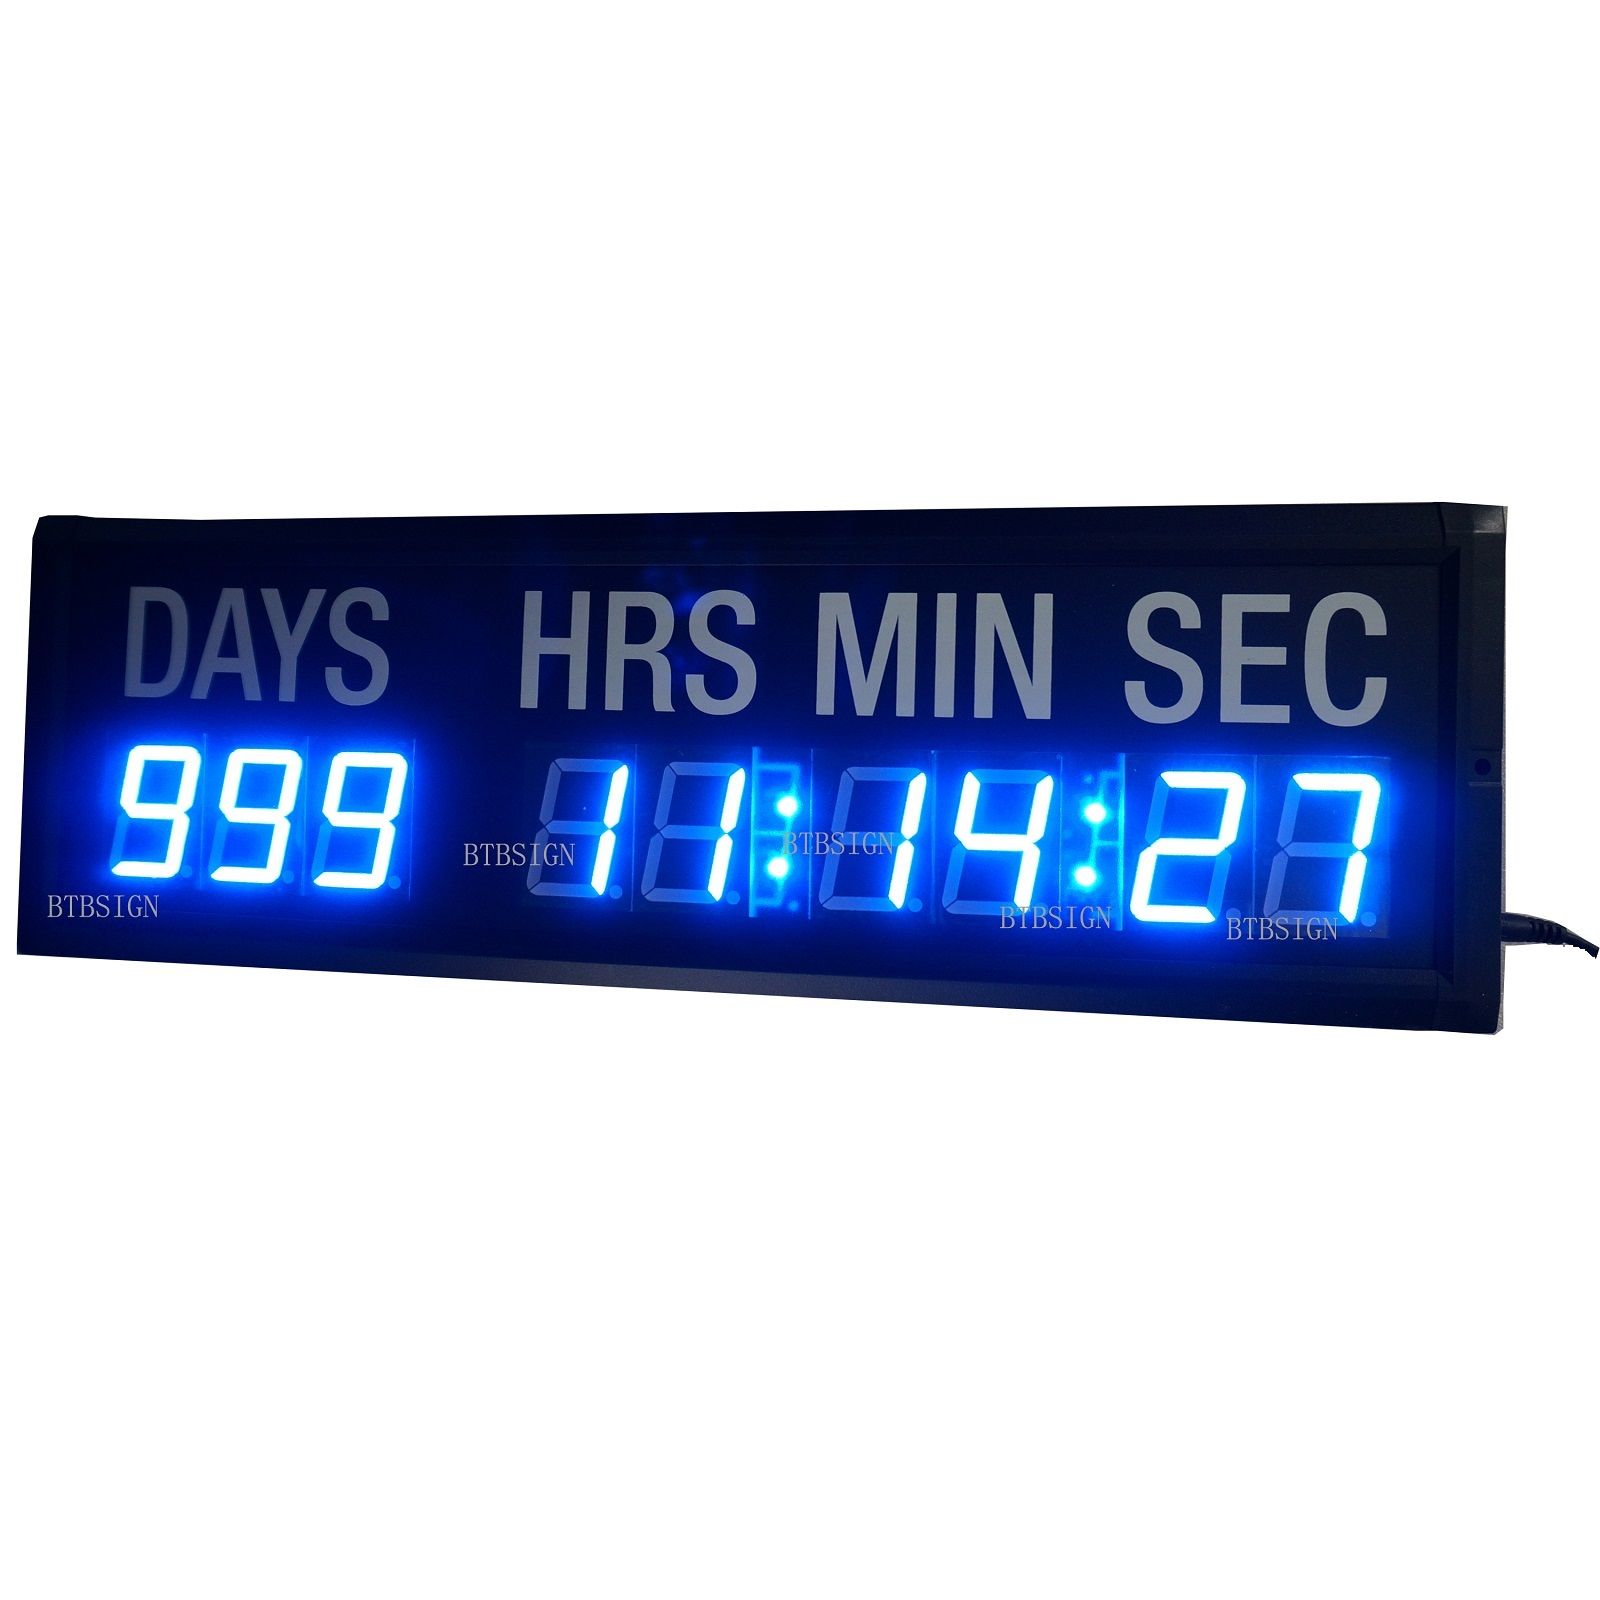 Blue Led Countdown Clock In Days Hours Minutes Seconds Every 24hours Decrease 1 Day ...1600 x 1600